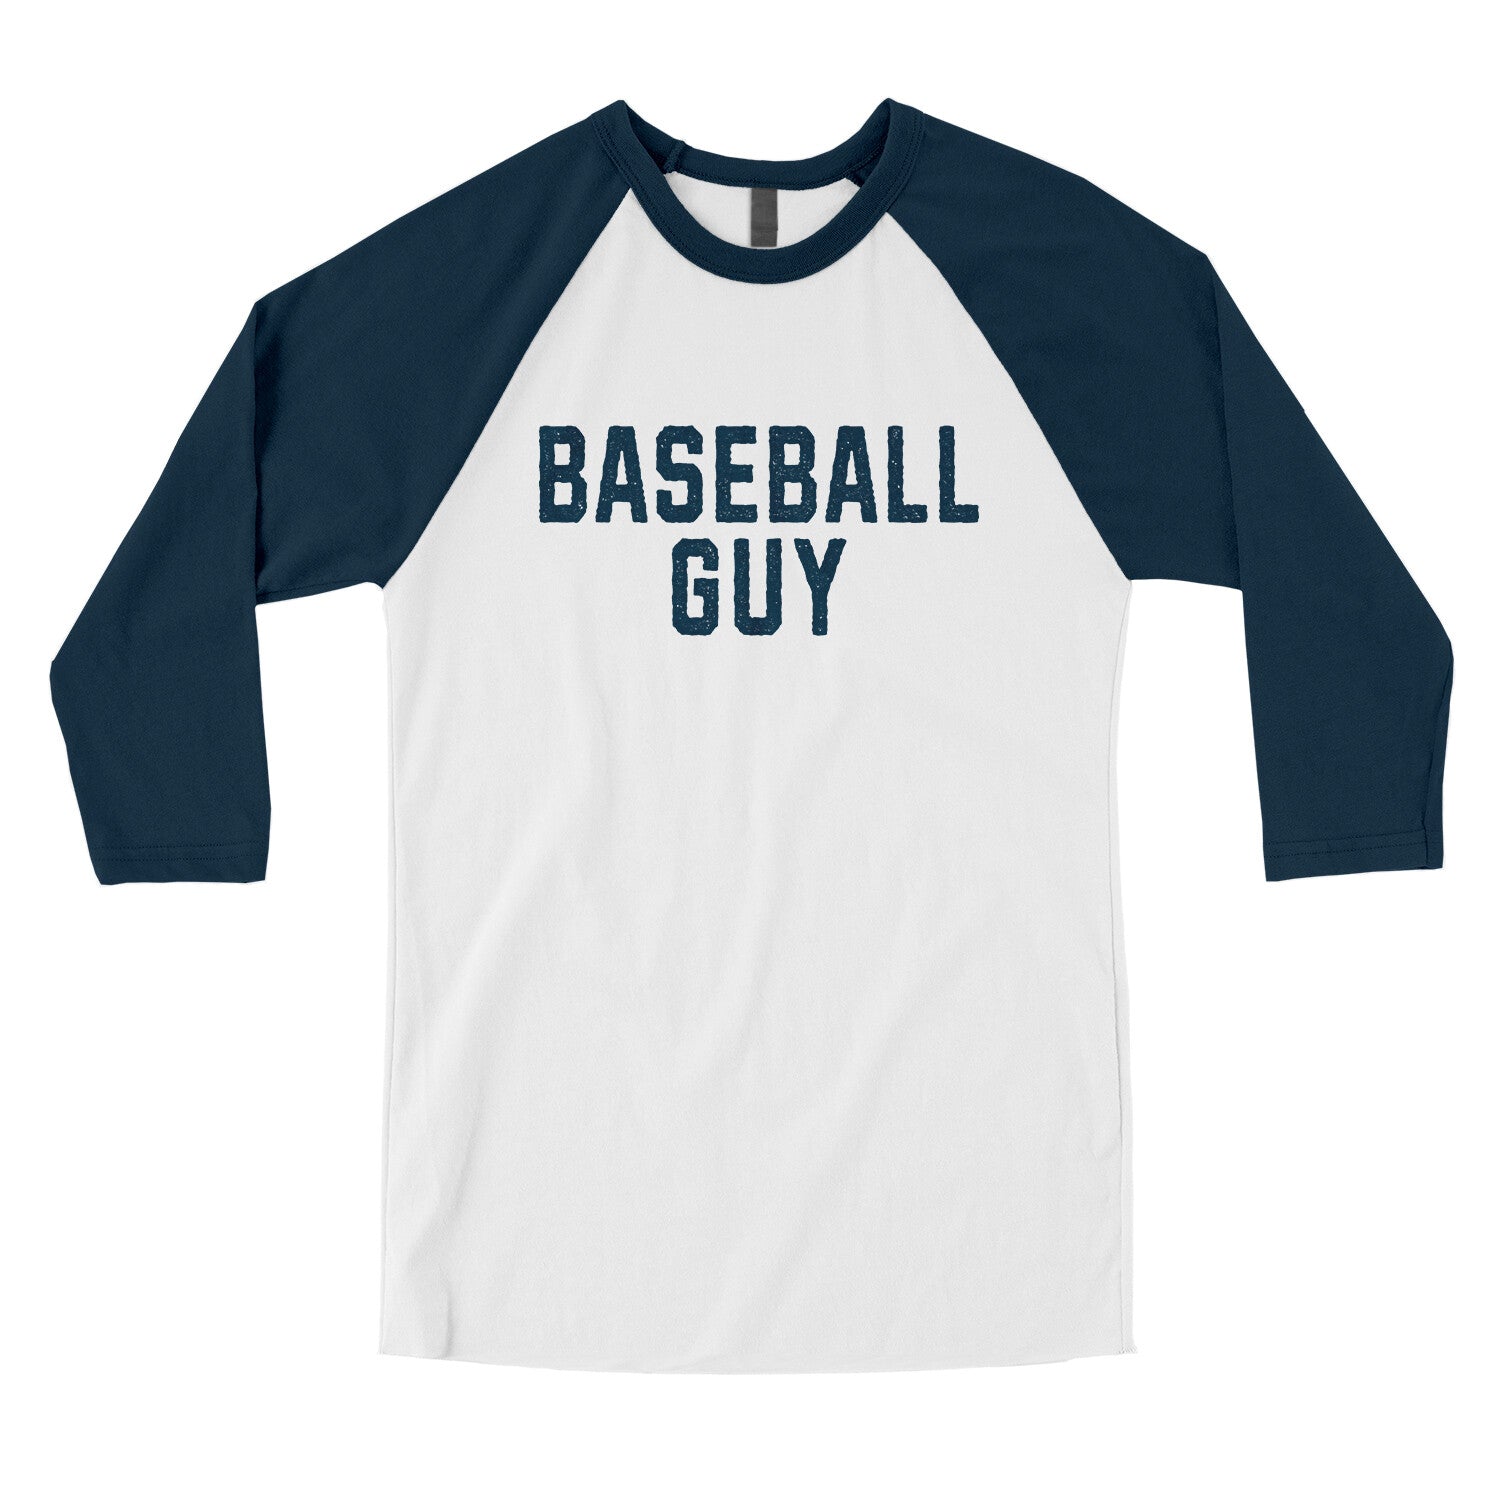 Baseball Guy in White with Navy Color